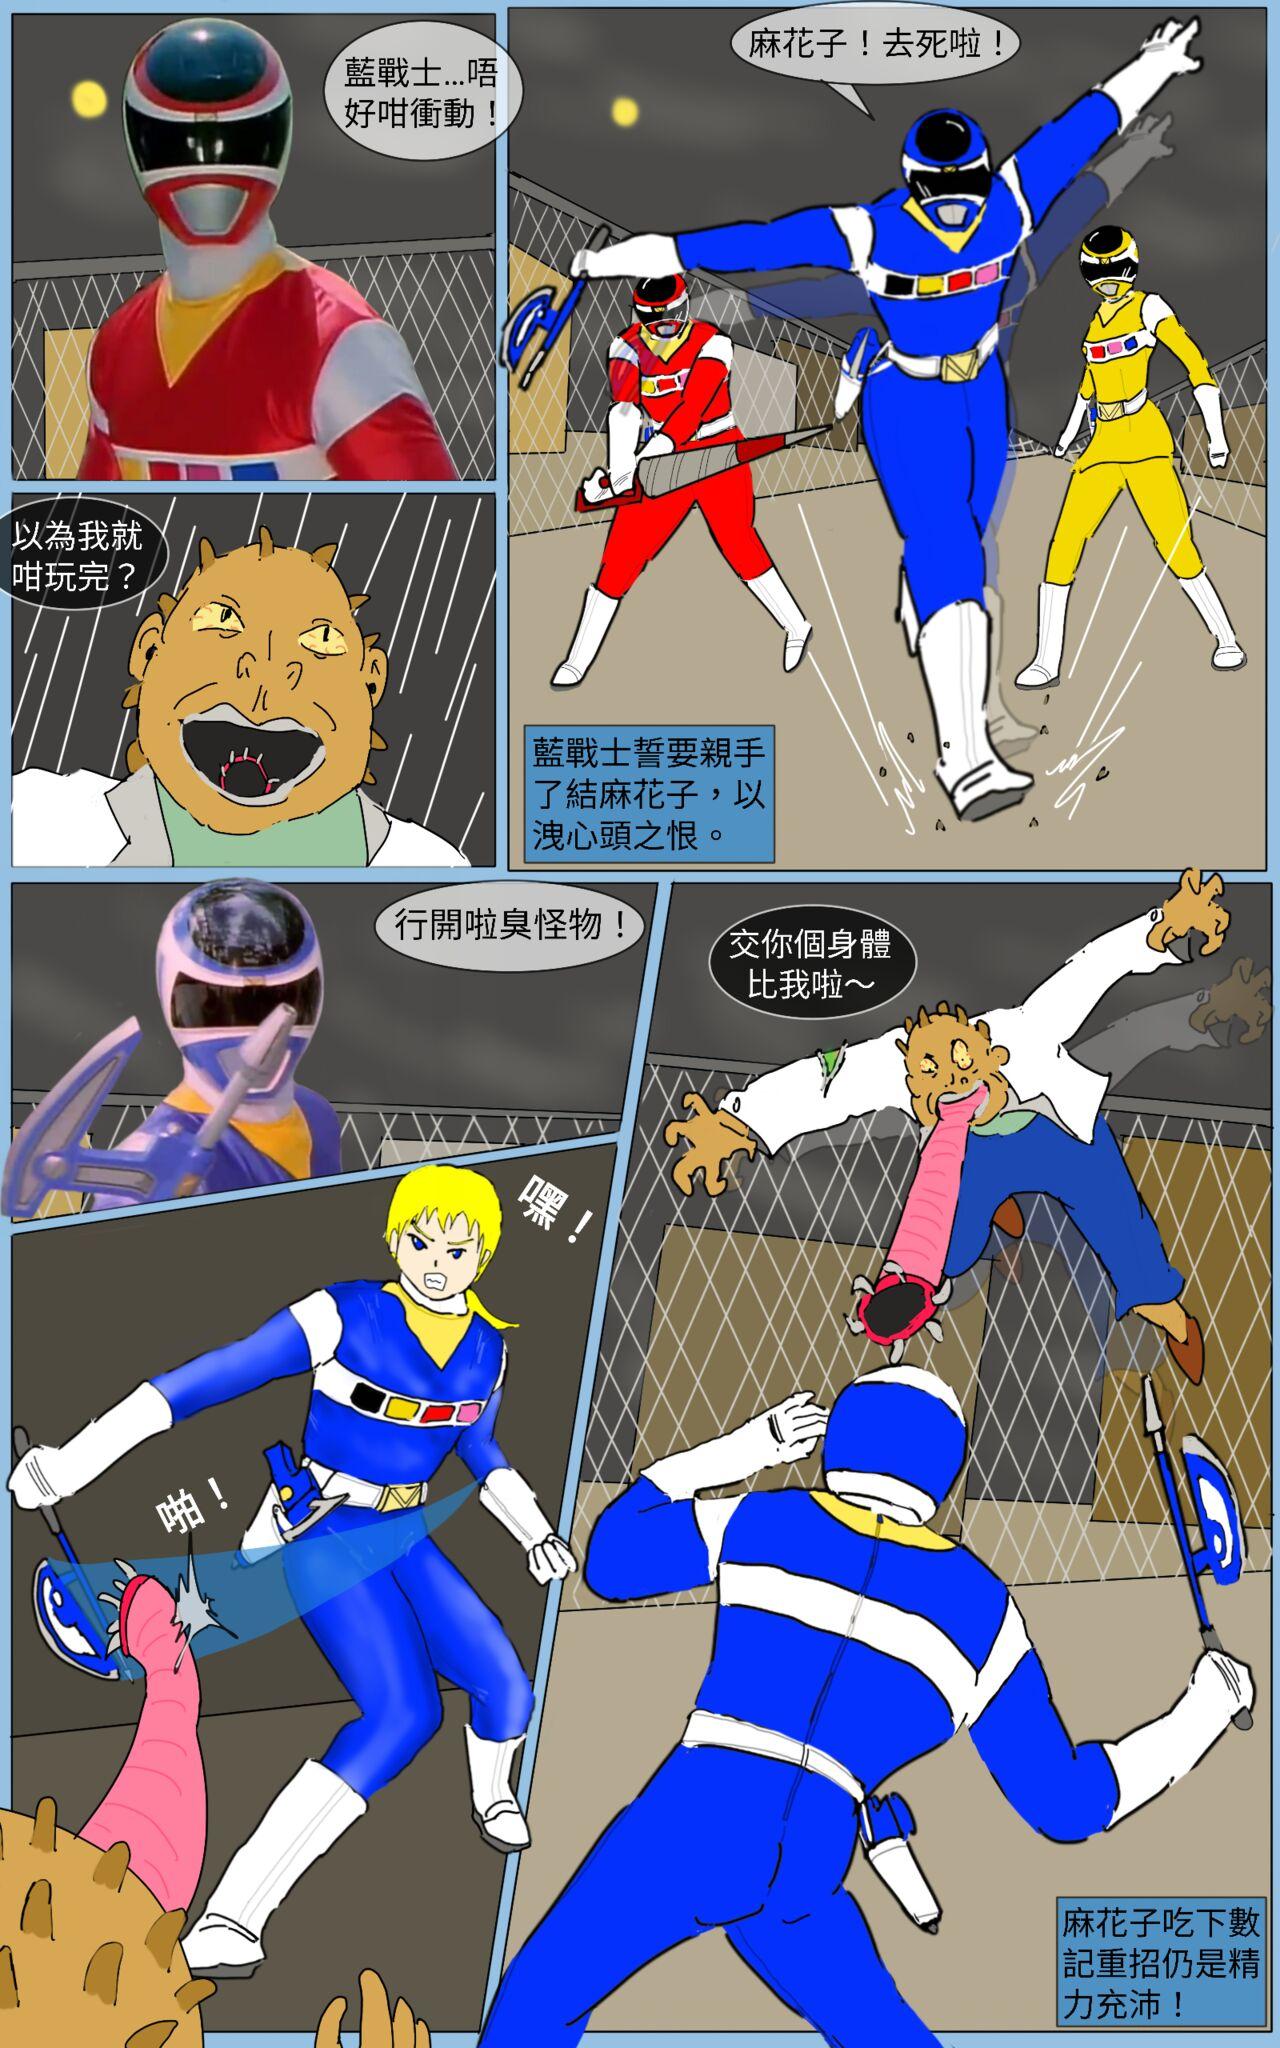 Jerking Off Mission 23 - Super sentai Russian - Page 10